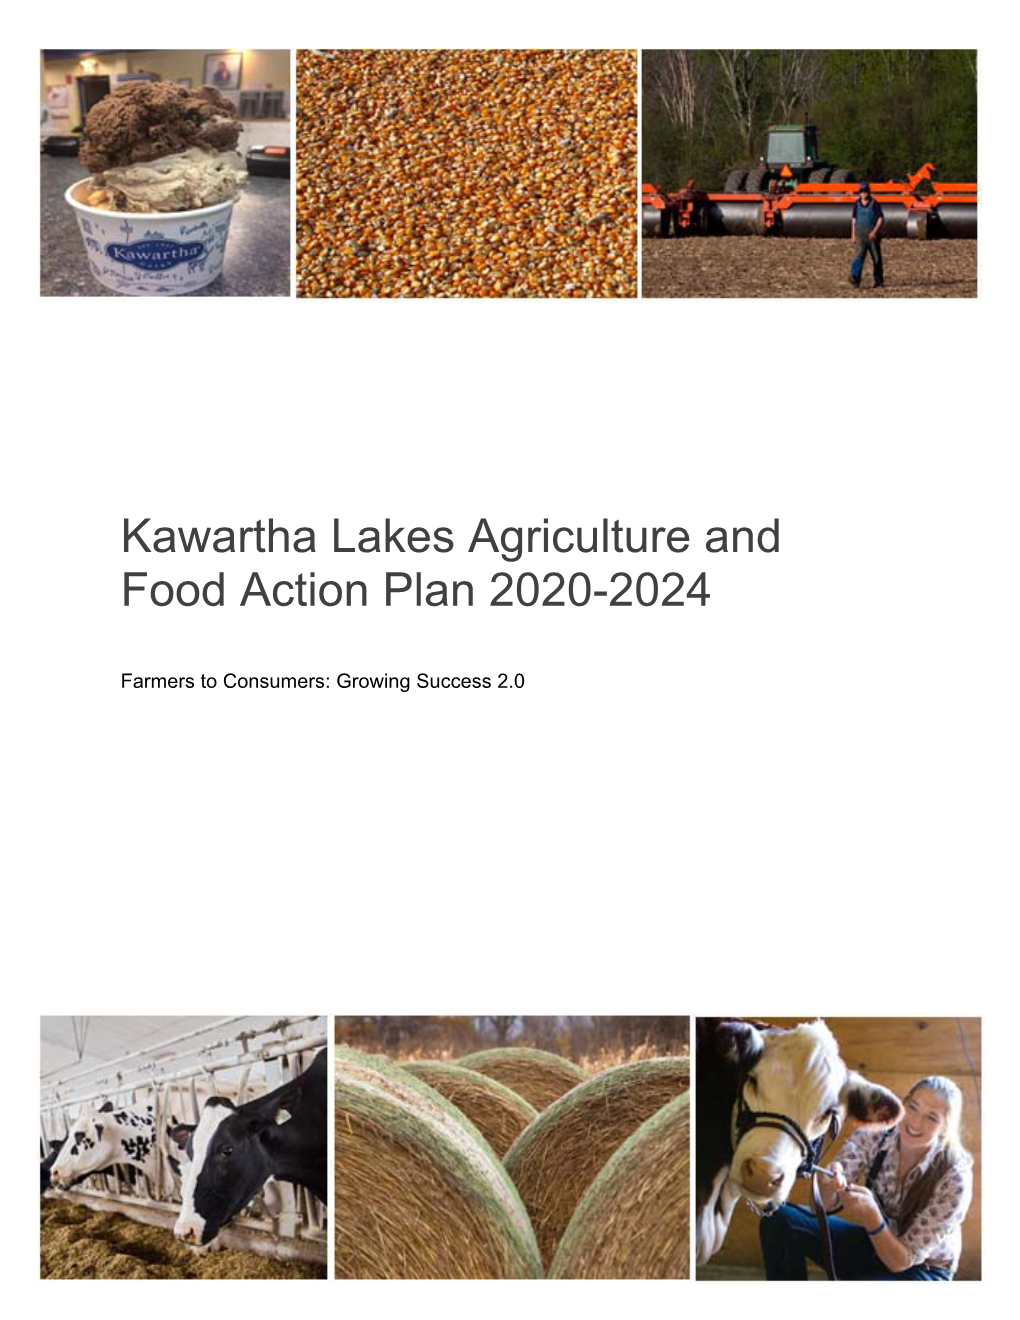 Kawartha Lakes Agriculture and Food Action Plan 2020-2024